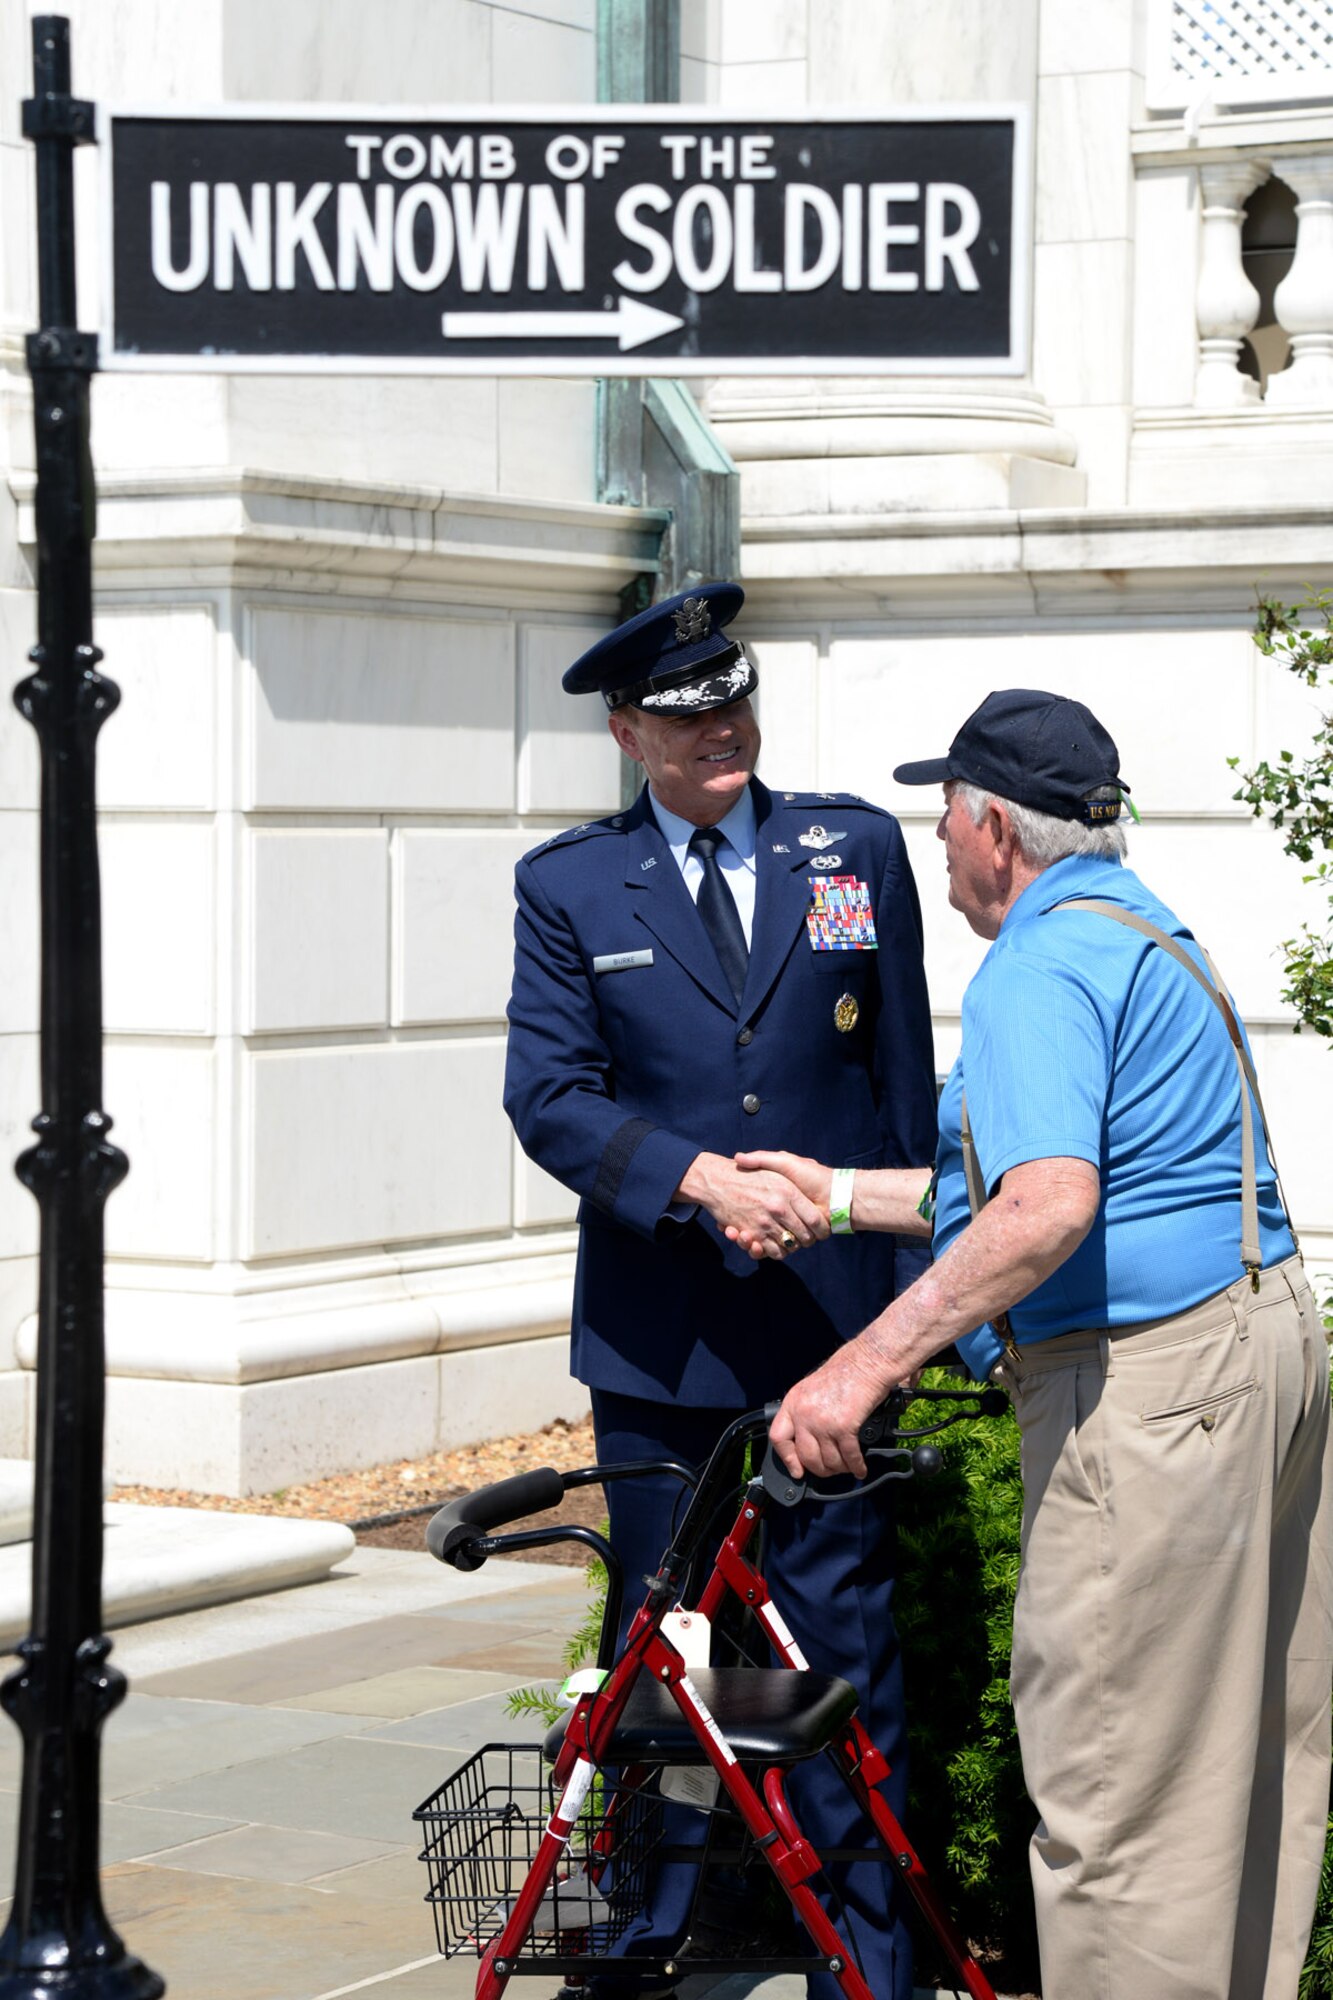 Air Force District of Washington Commander Maj. Gen. Darryl Burke greets a
Vets Roll honoree while visiting the Tomb of the Unknown Soldier for a
wreath laying ceremony at Arlington National Cemetery on May 24, 2016. The
Vets Roll Project pays tribute to WW2 and Korean War Veterans by taking them
on a four day trip to Washington D.C. The Air Force District of Washington
brings air, space and cyberspace capabilities to the joint team protecting
the nation's capital, and supports local personnel and those serving
worldwide. (U.S. Air Force photo/Tech. Sgt. Matt Davis)
